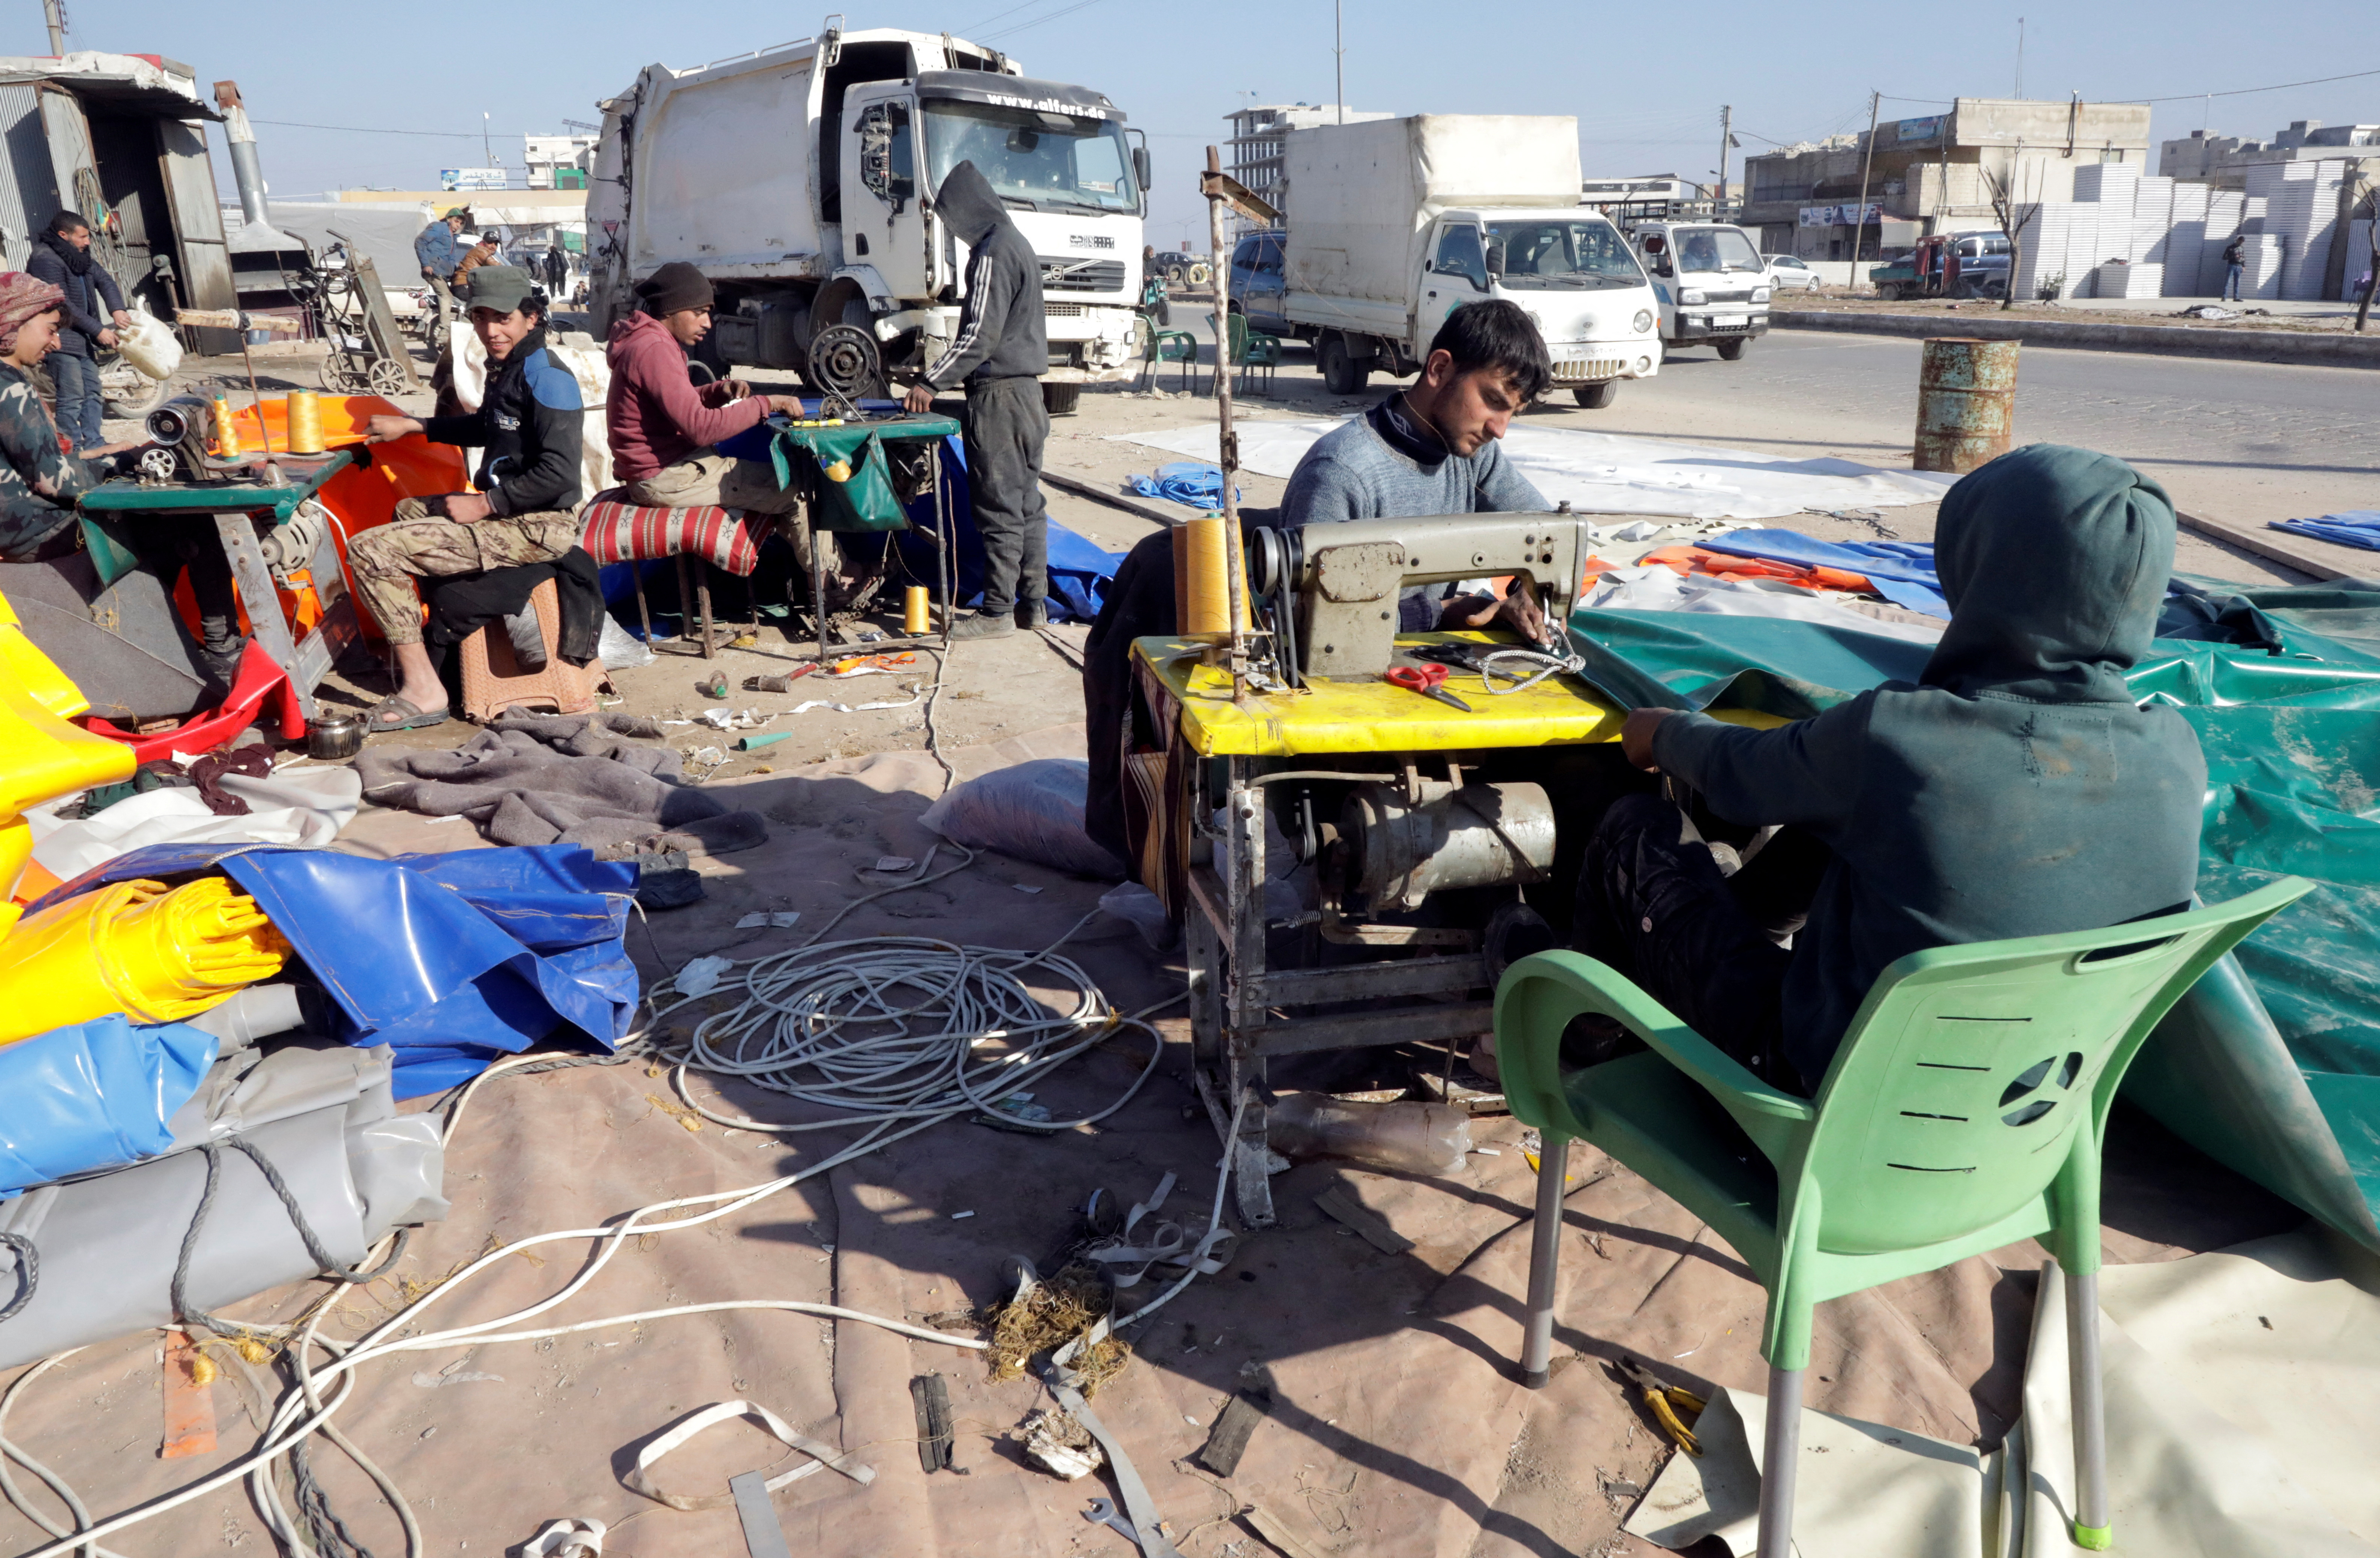 Workers use sewing machines at a tent manufacturing workshop in Azaz